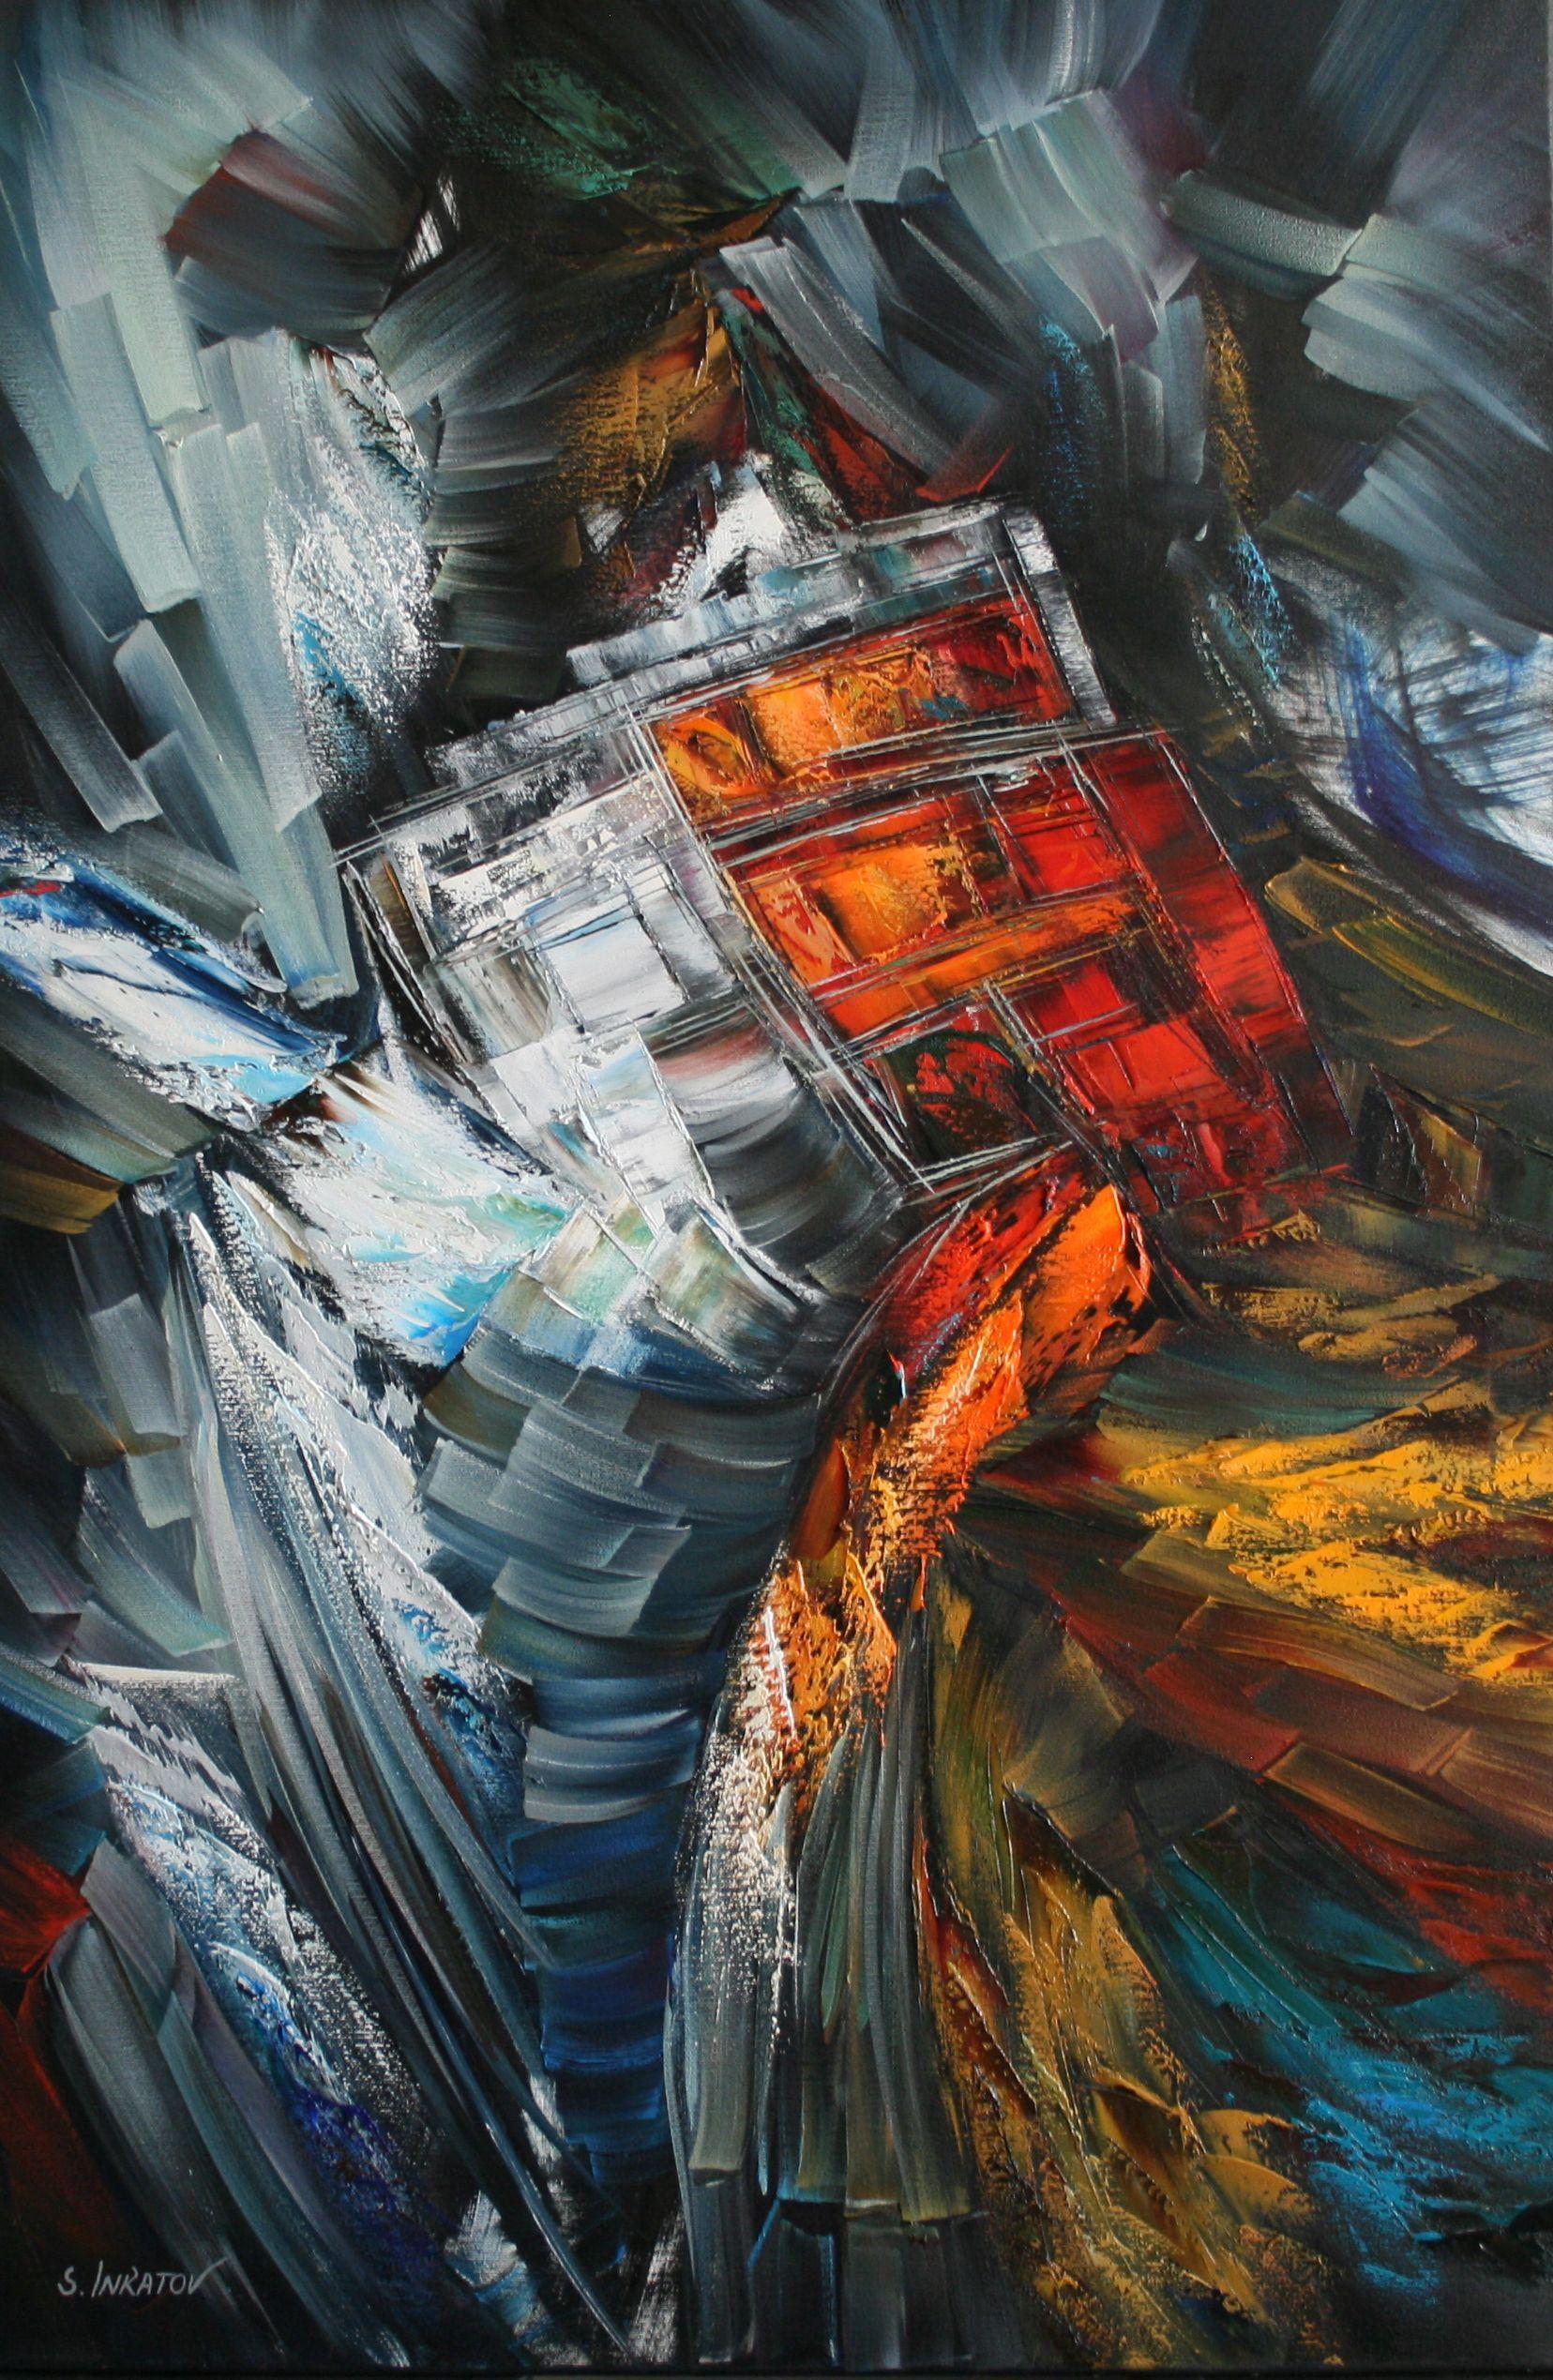 Sergei  Inkatov Abstract Painting - Dreams about Japan 2, Painting, Oil on Canvas